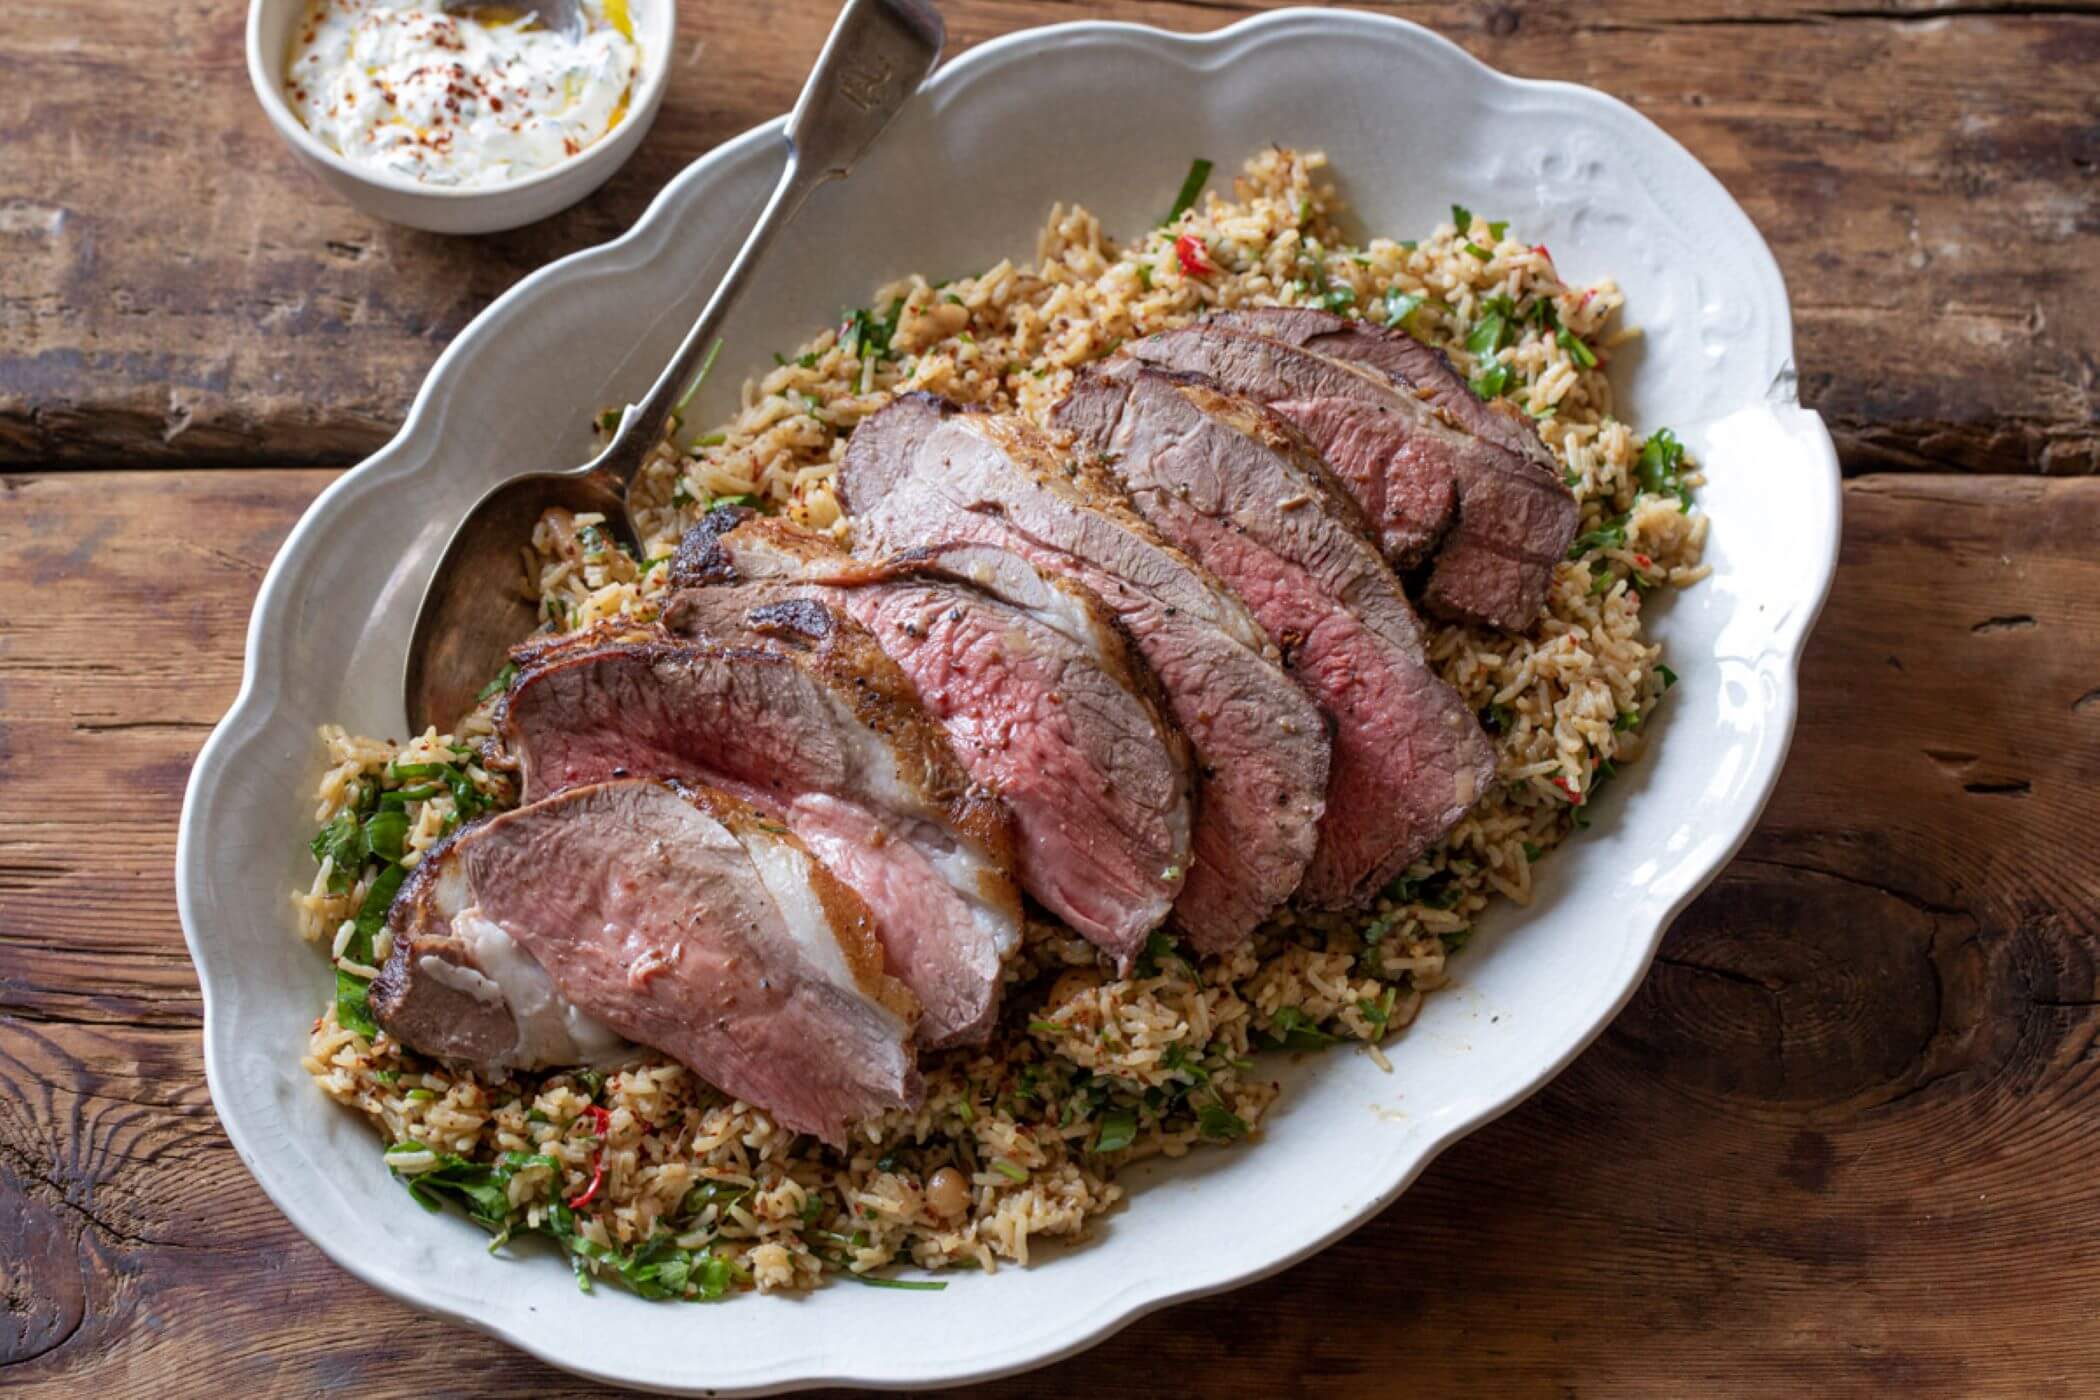 Butterflied leg of lamb cooked pink, sitting on top of rice pilaf and served with a minted yoghurt dip.